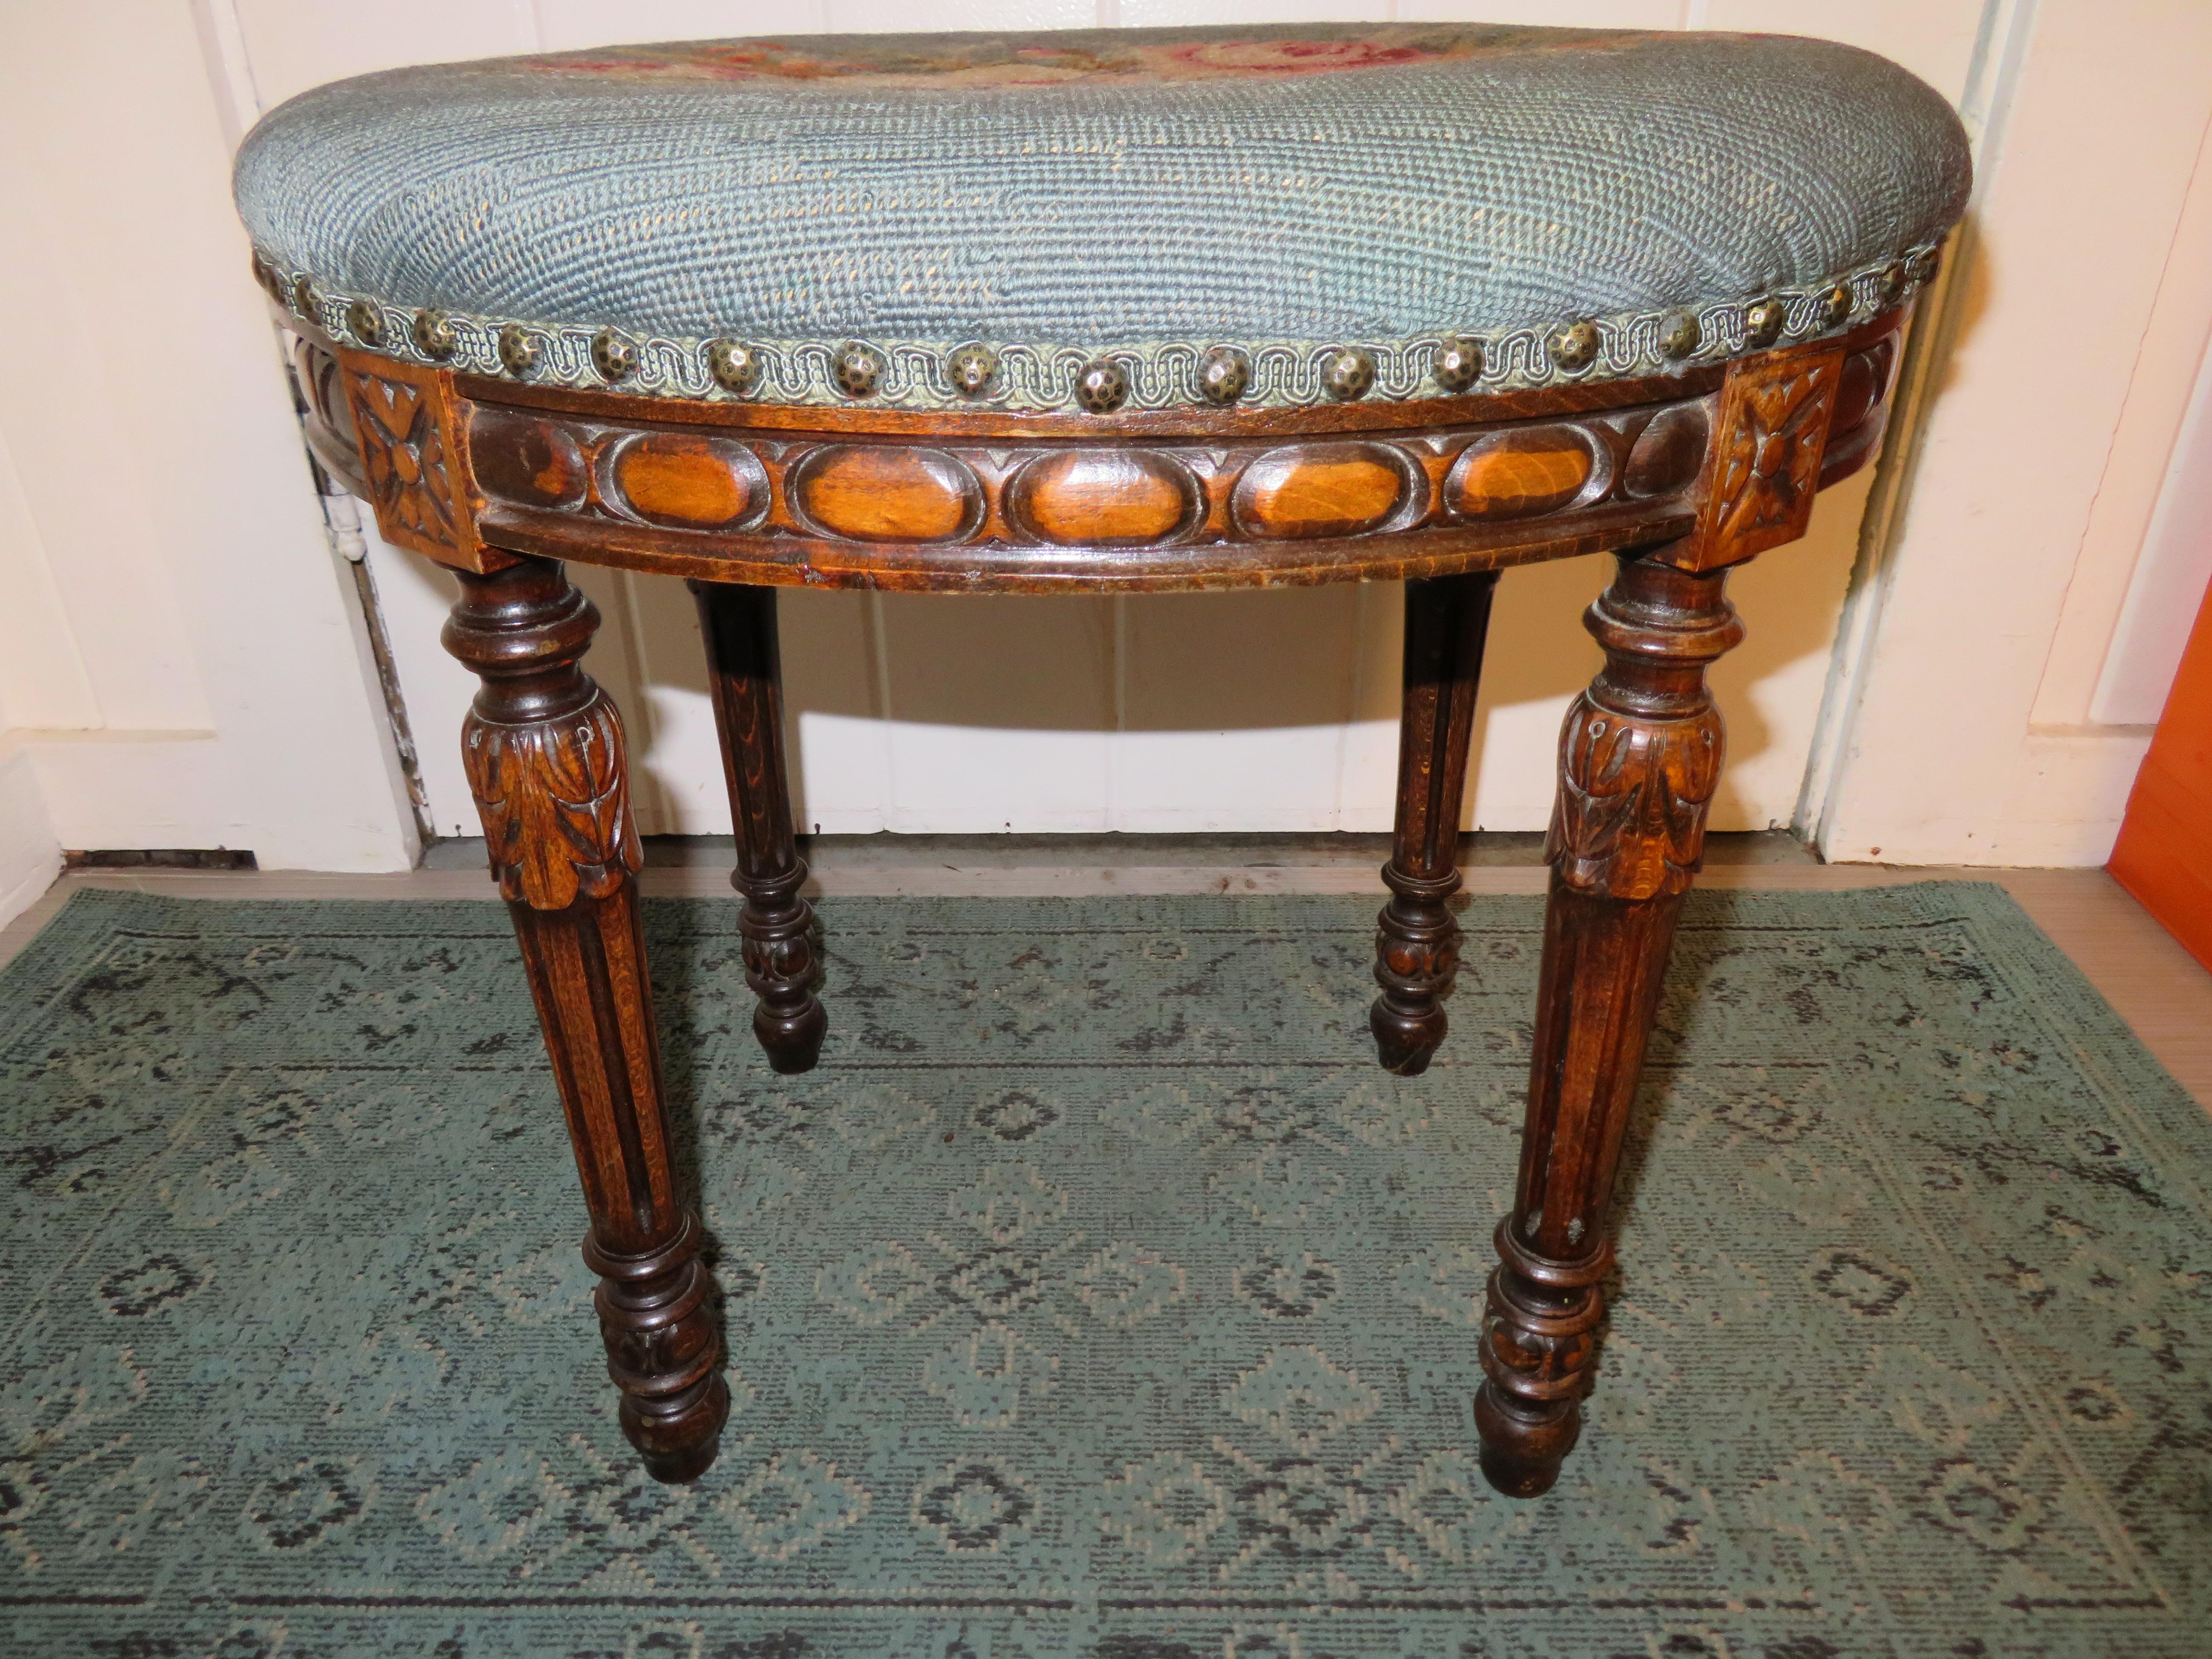 Upholstery Lovely Louis XVI Oval Floral Needlepoint Stool Bench For Sale